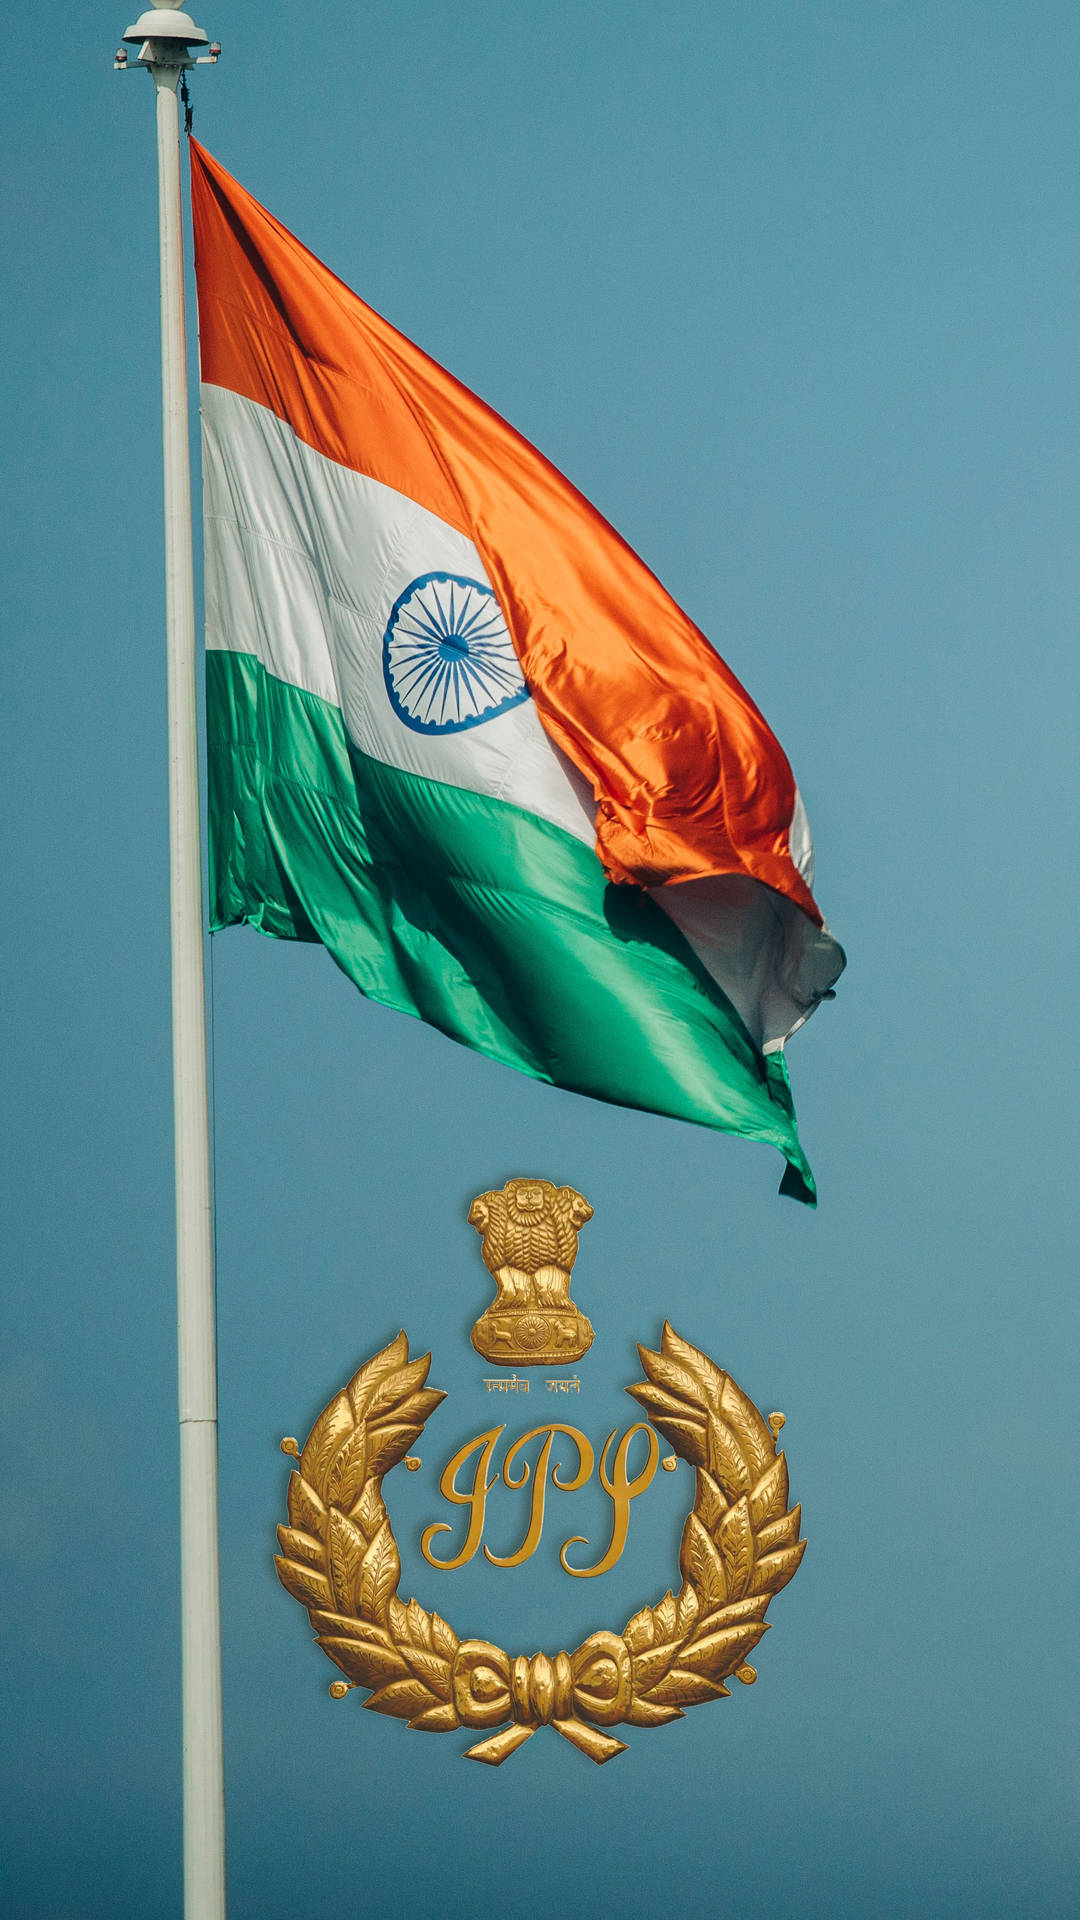 Indian Flag And IPS Logo Wallpaper